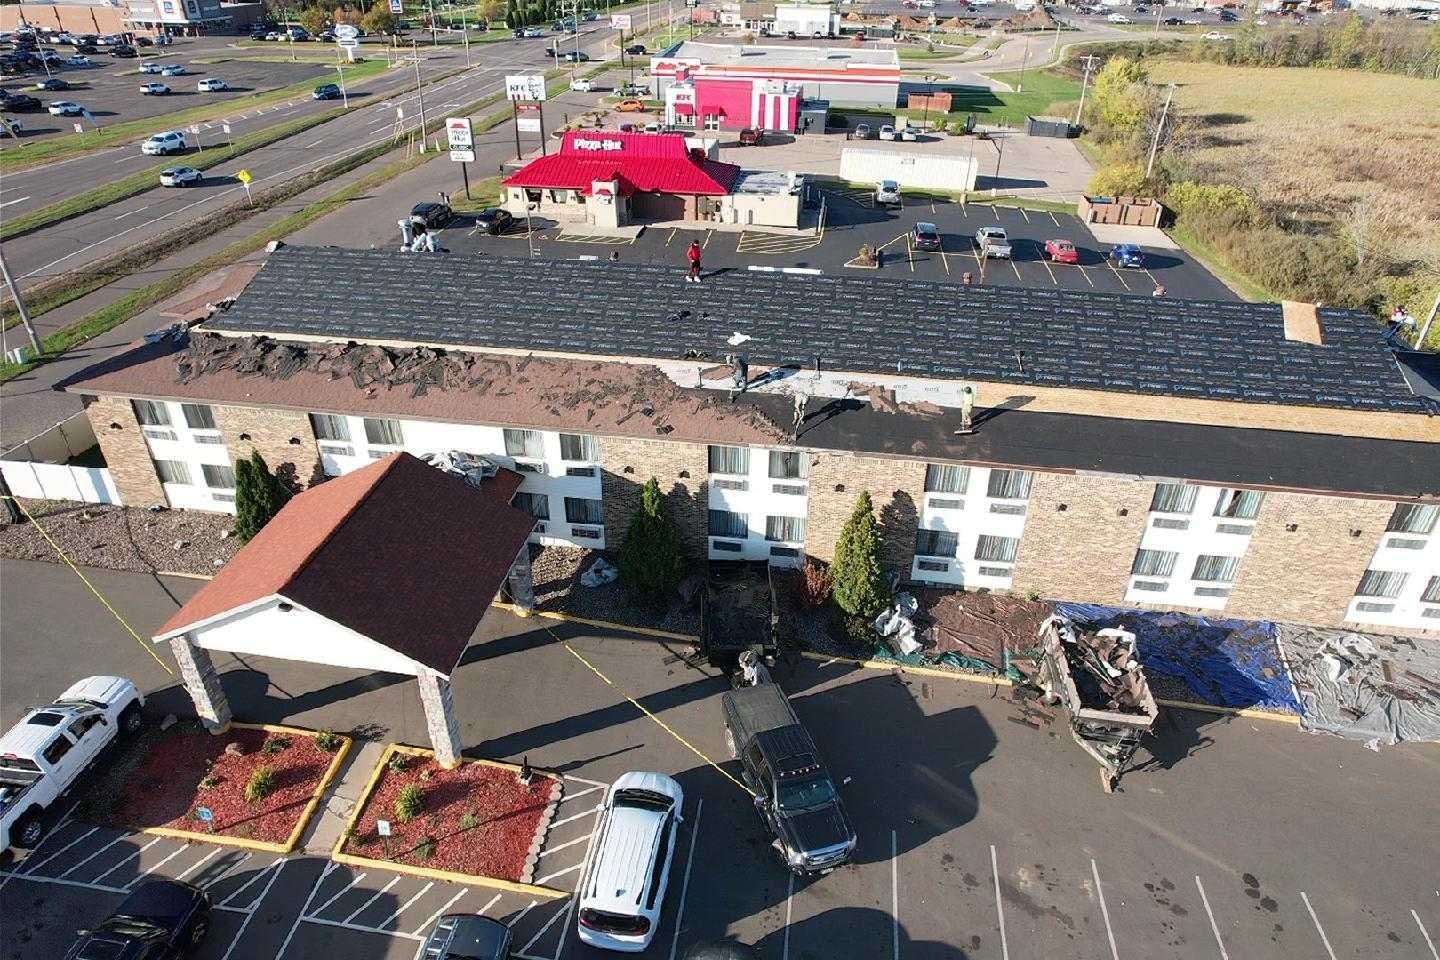 An aerial view of a hotel with cars parked in front of it